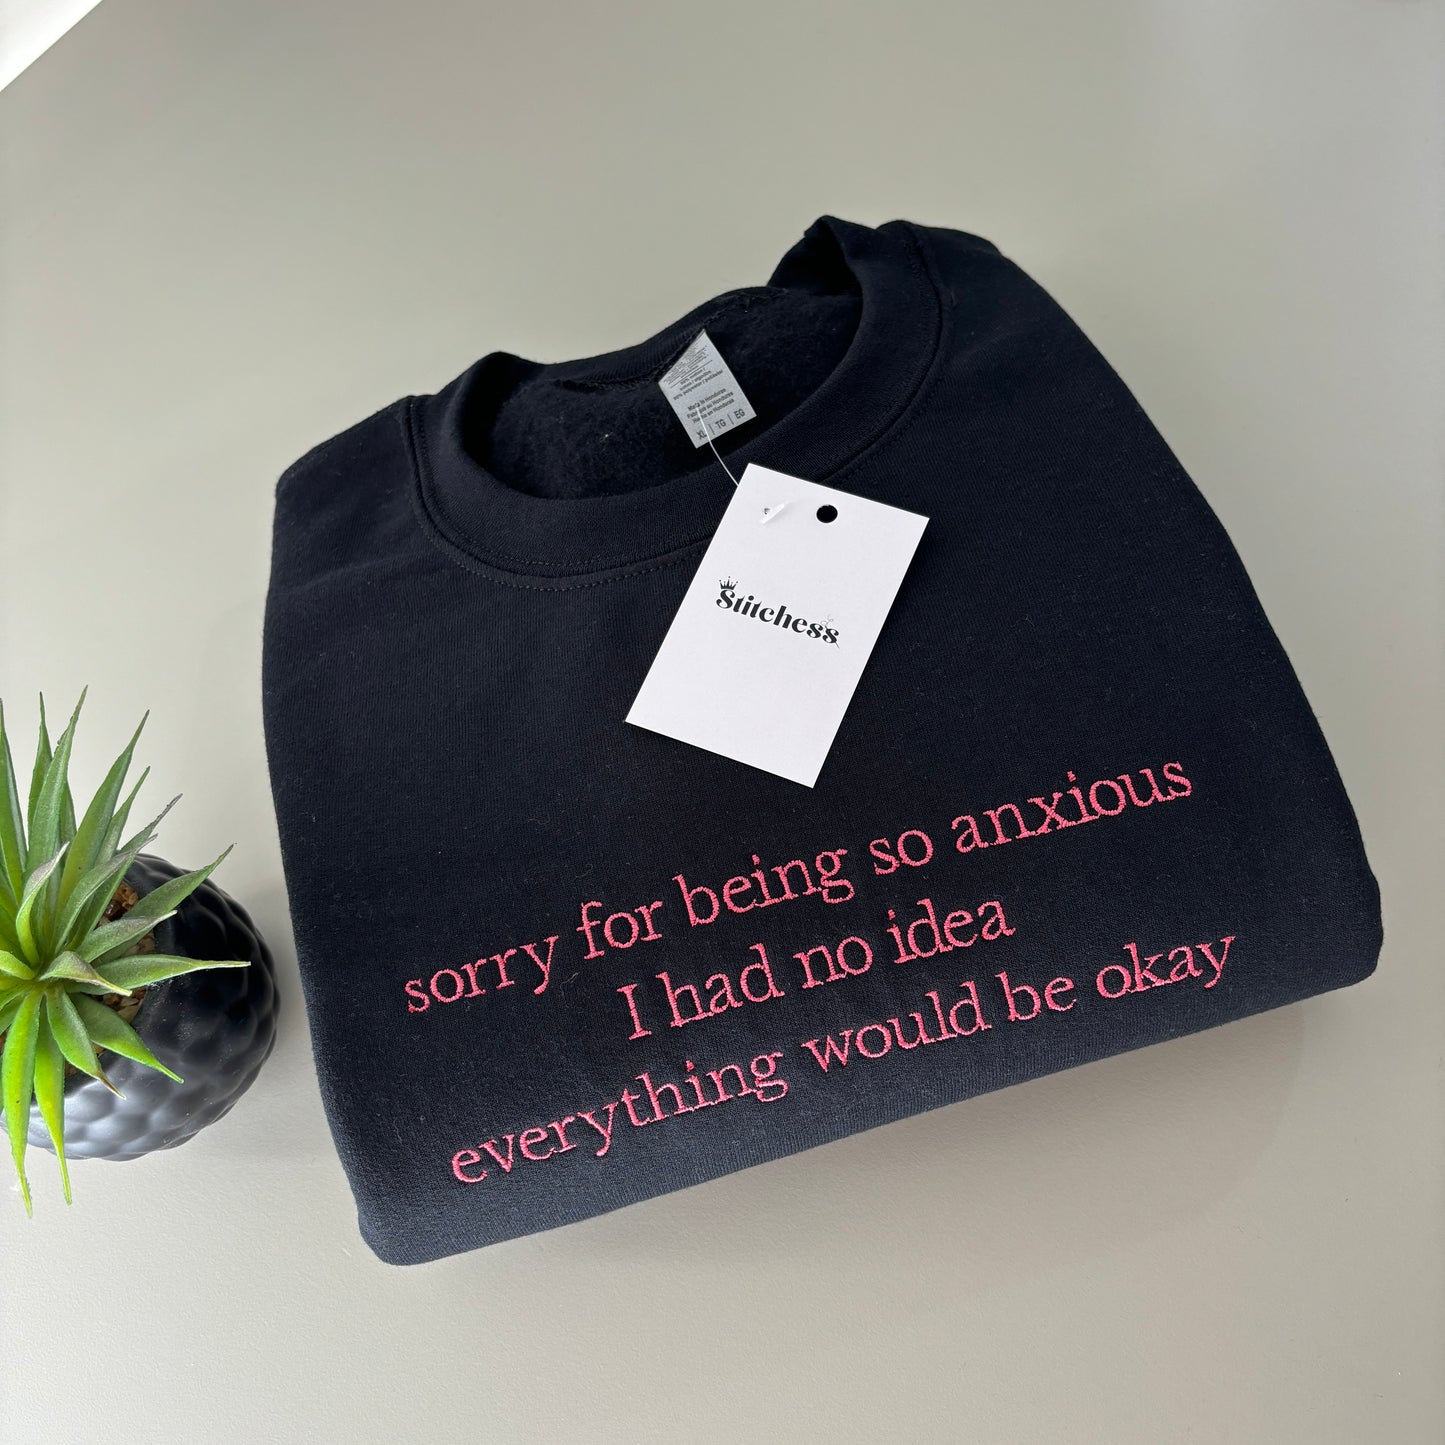 SORRY FOR BEING ANXIOUS EMBROIDERED SWEATSHIRT